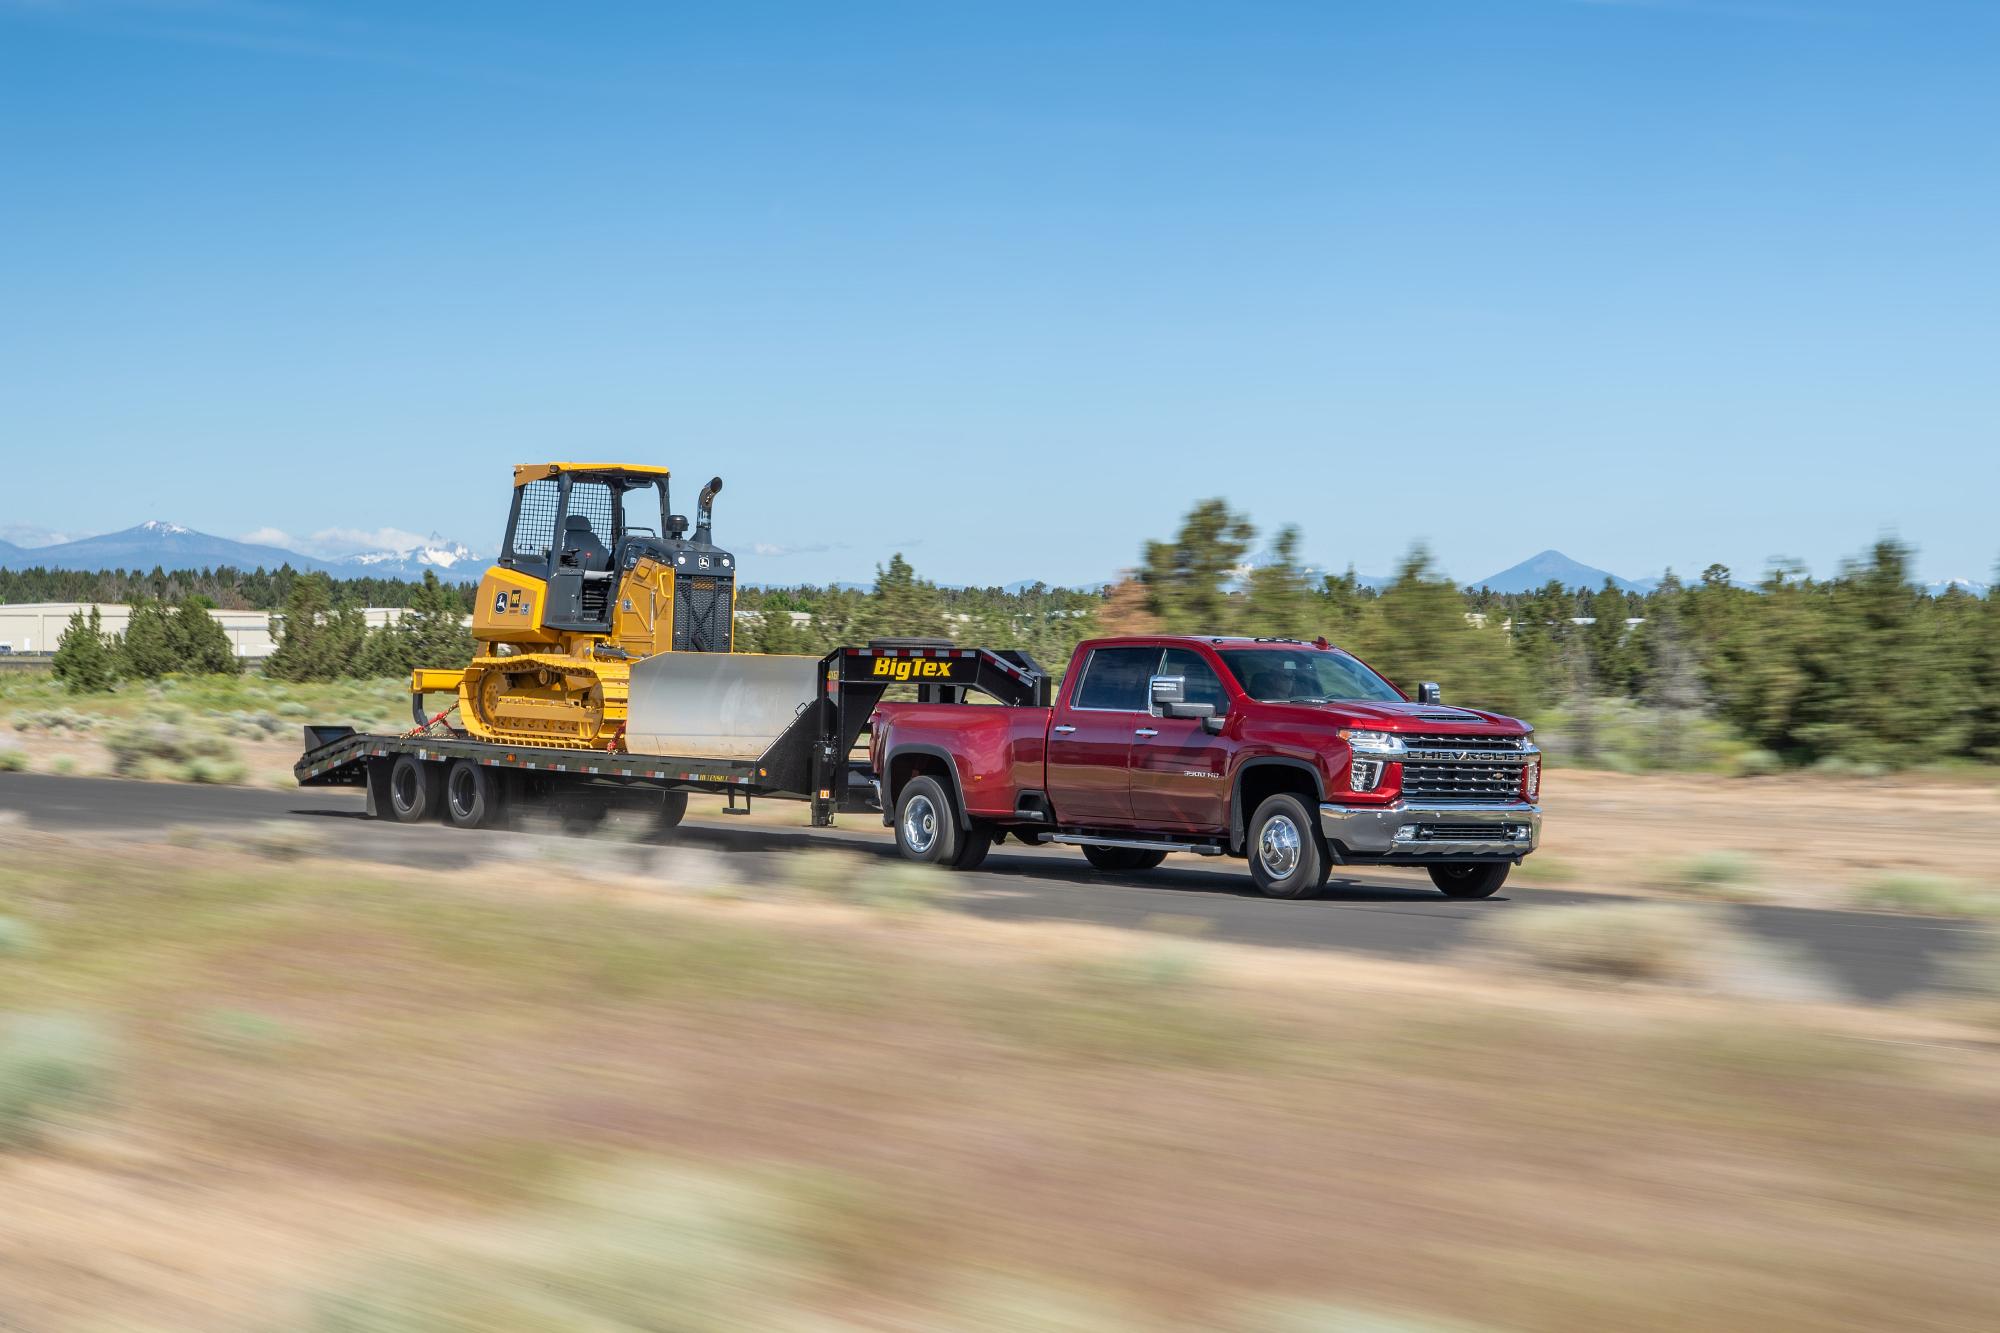 The 2021 Chevy Silverado 3500 HD is a beast when it comes to towing and hauling.